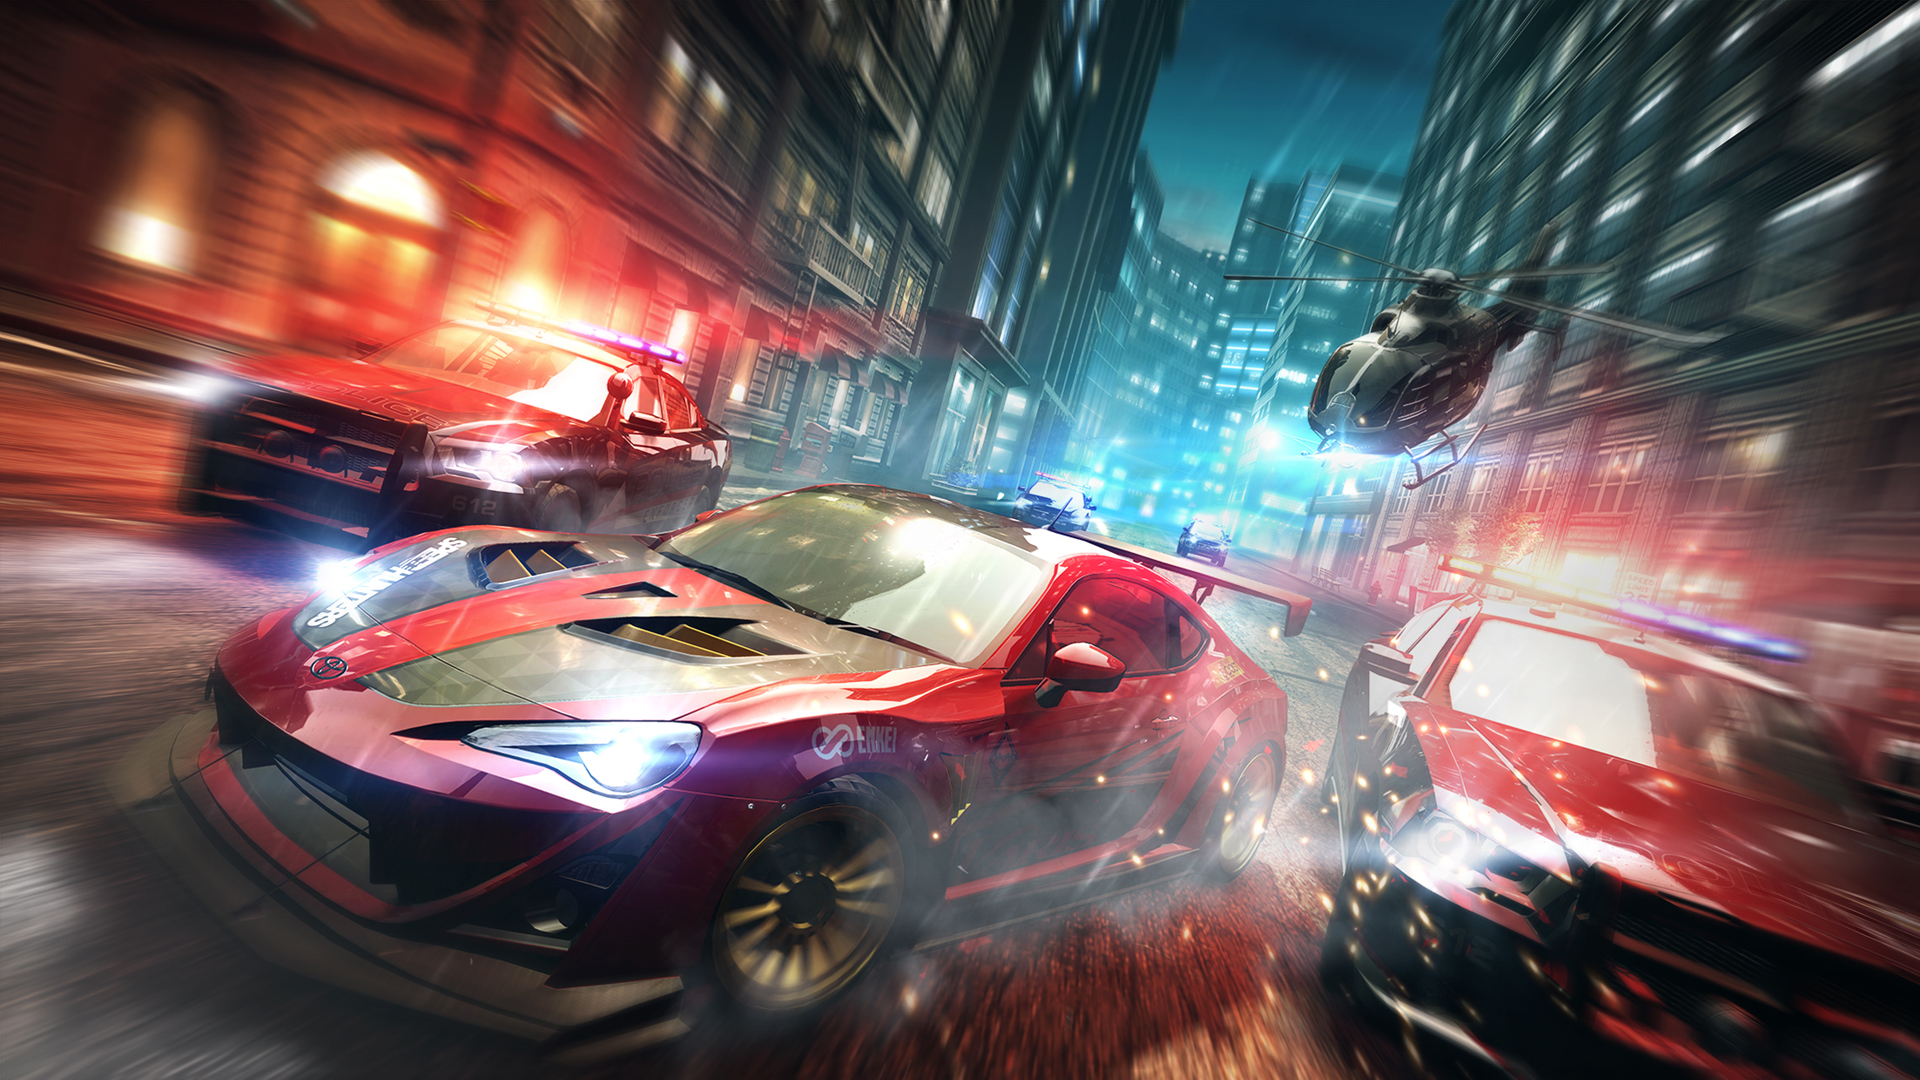 Need For Speed No Limits Video Games Night City Toyota 86 Tuning Police Cars Motion Blur Dodge Charg 1920x1080